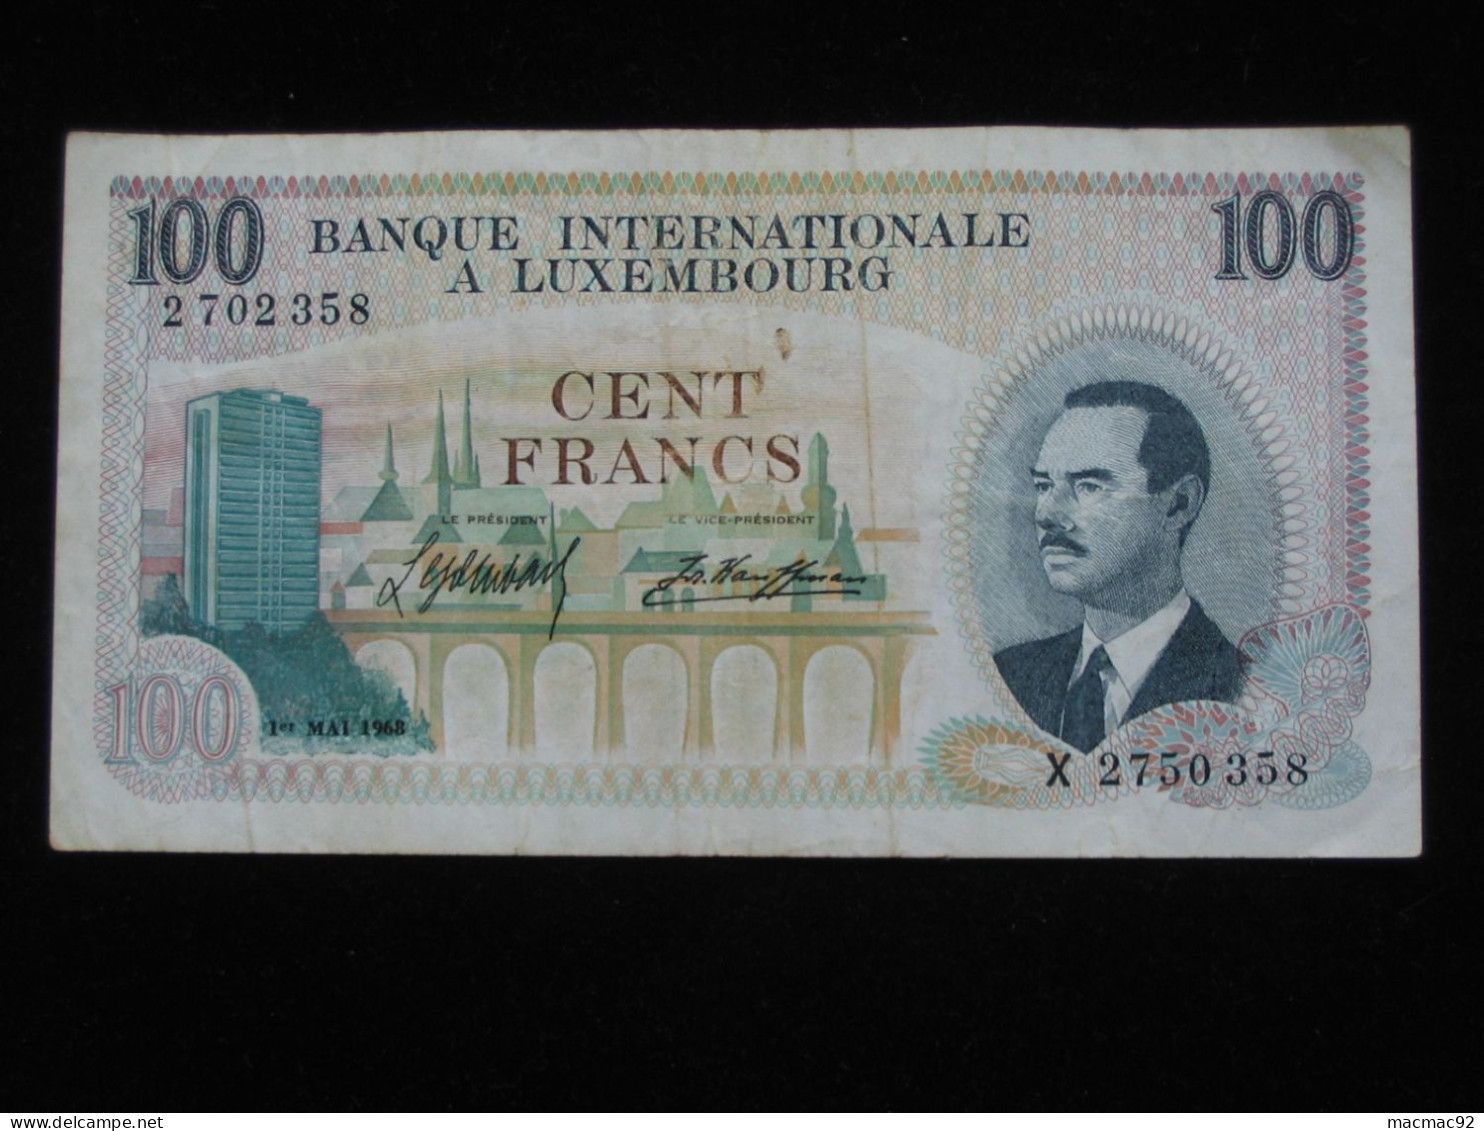 100 Francs 1968 - BANQUE INTERNATIONALE A LUXEMBOURG    **** EN  ACHAT IMMEDIAT  **** - Luxembourg